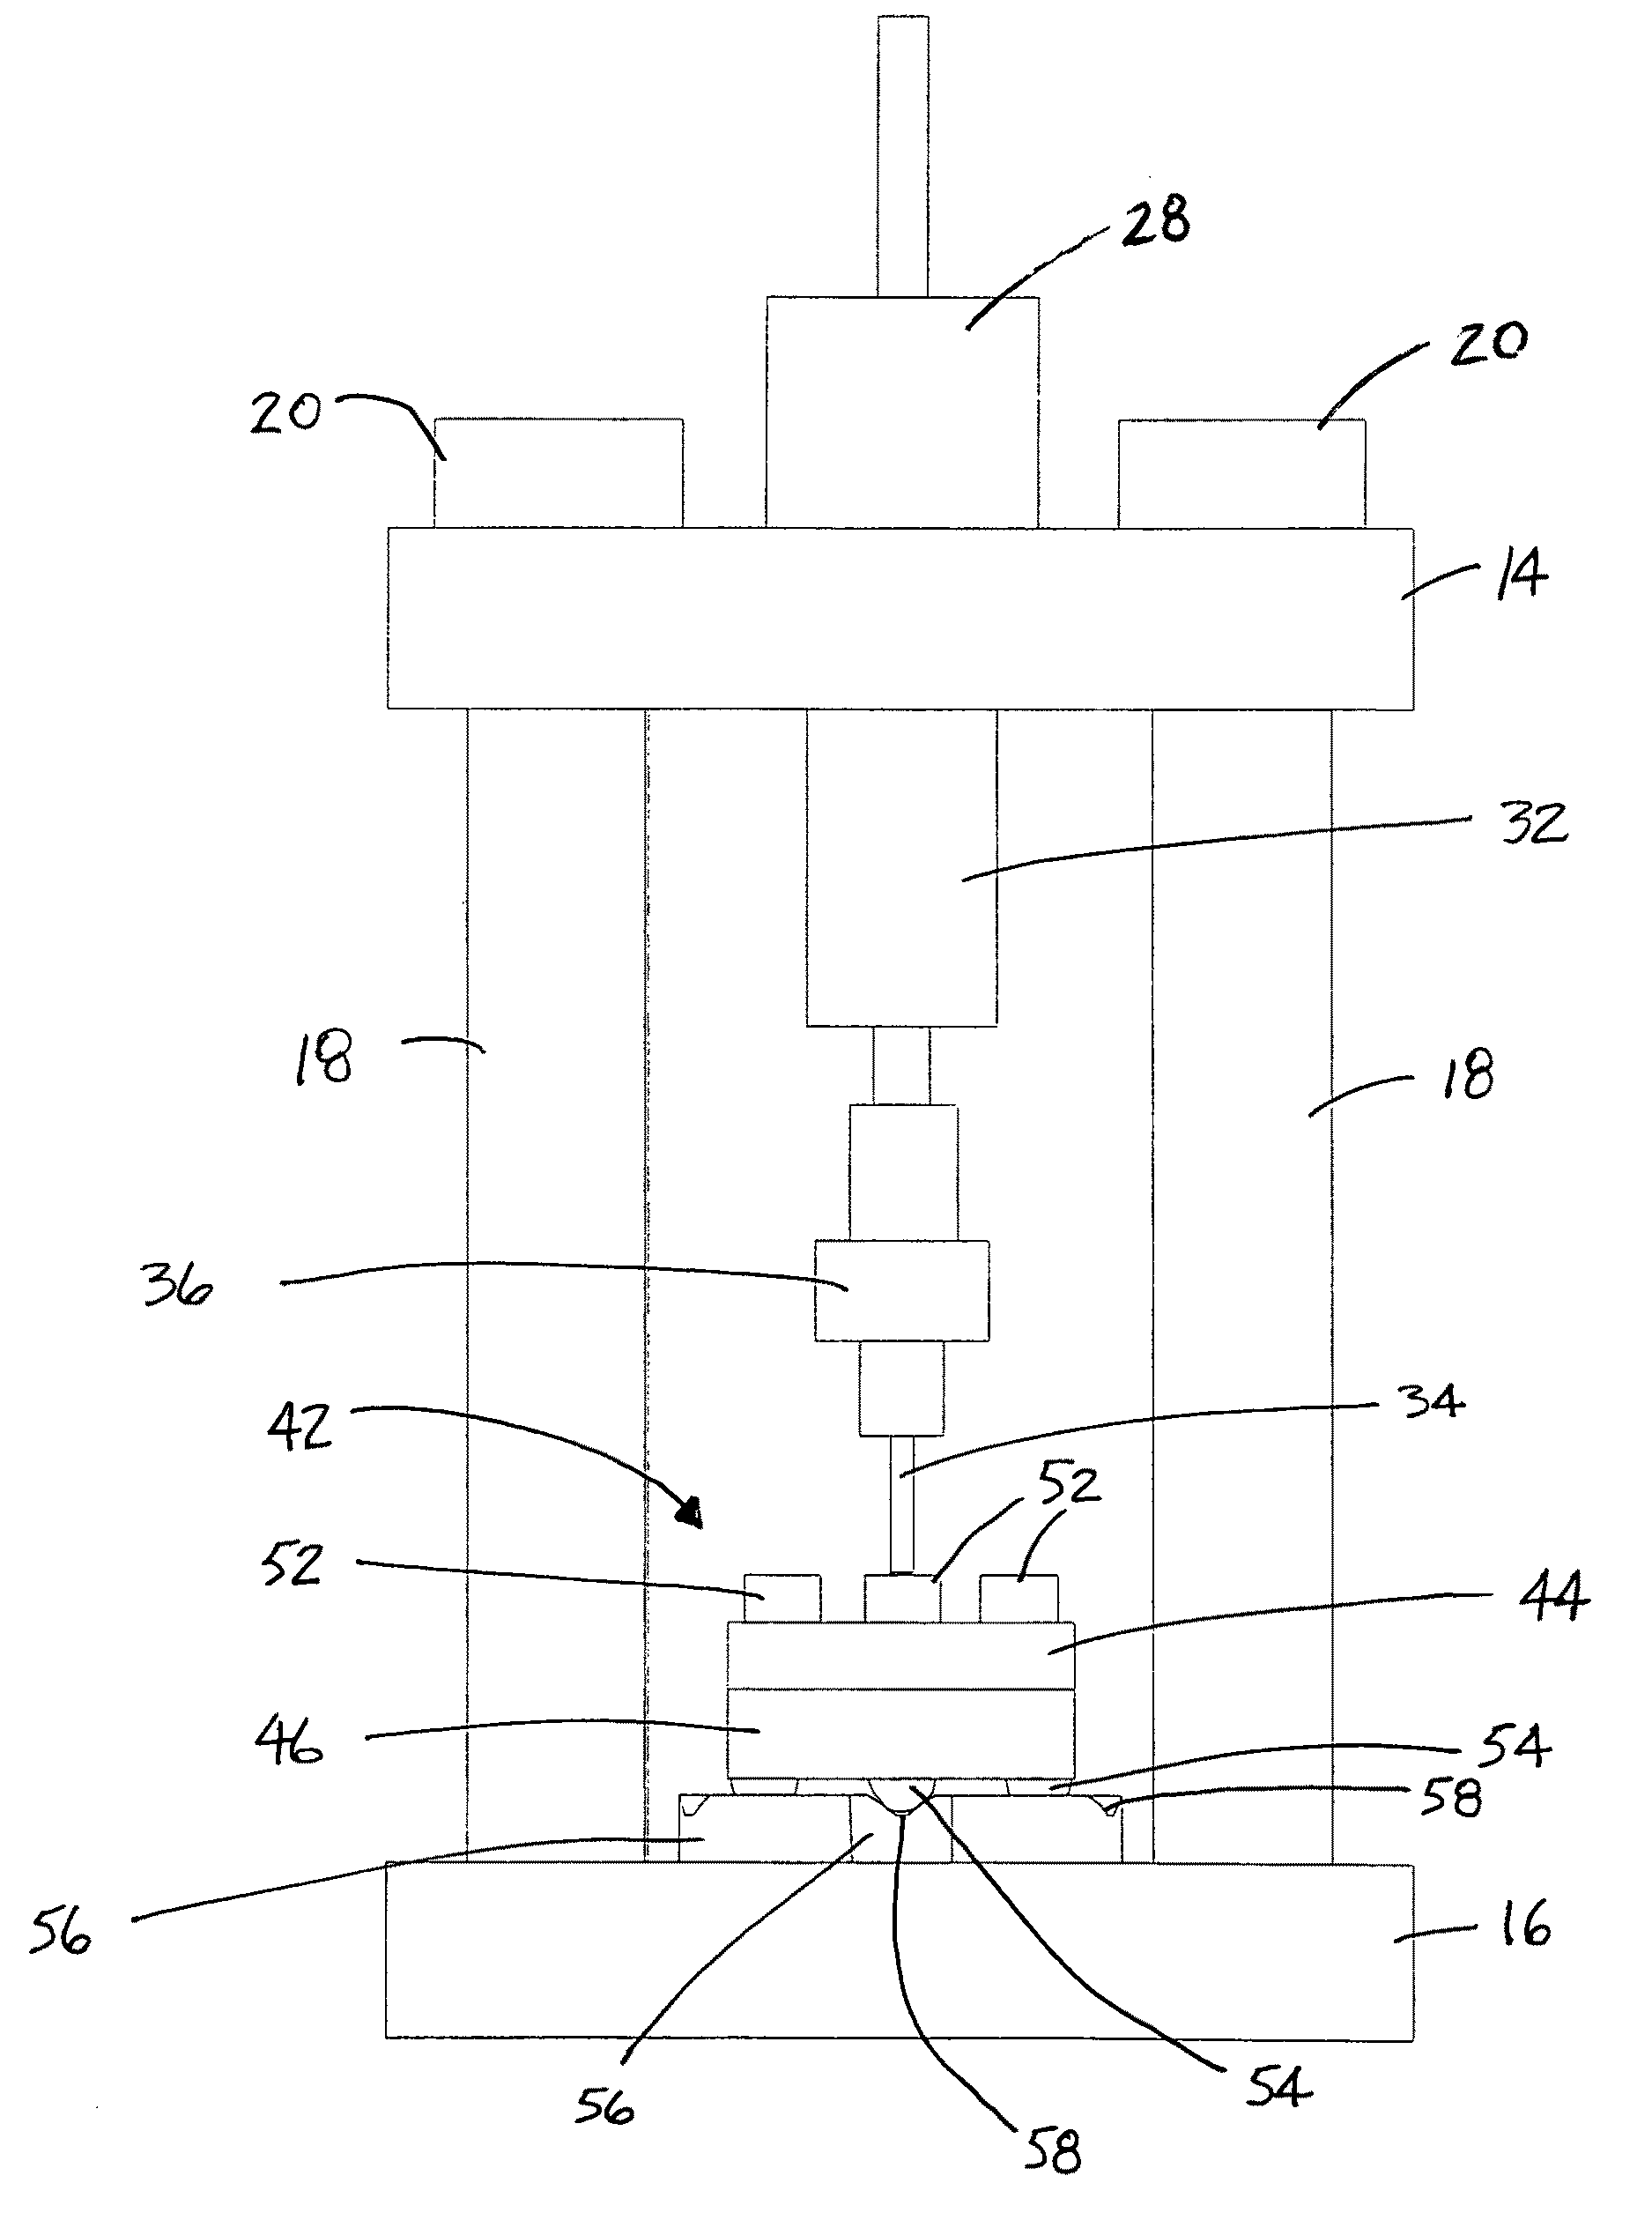 Method and apparatus for characterizing microscale formability of thin sheet materials